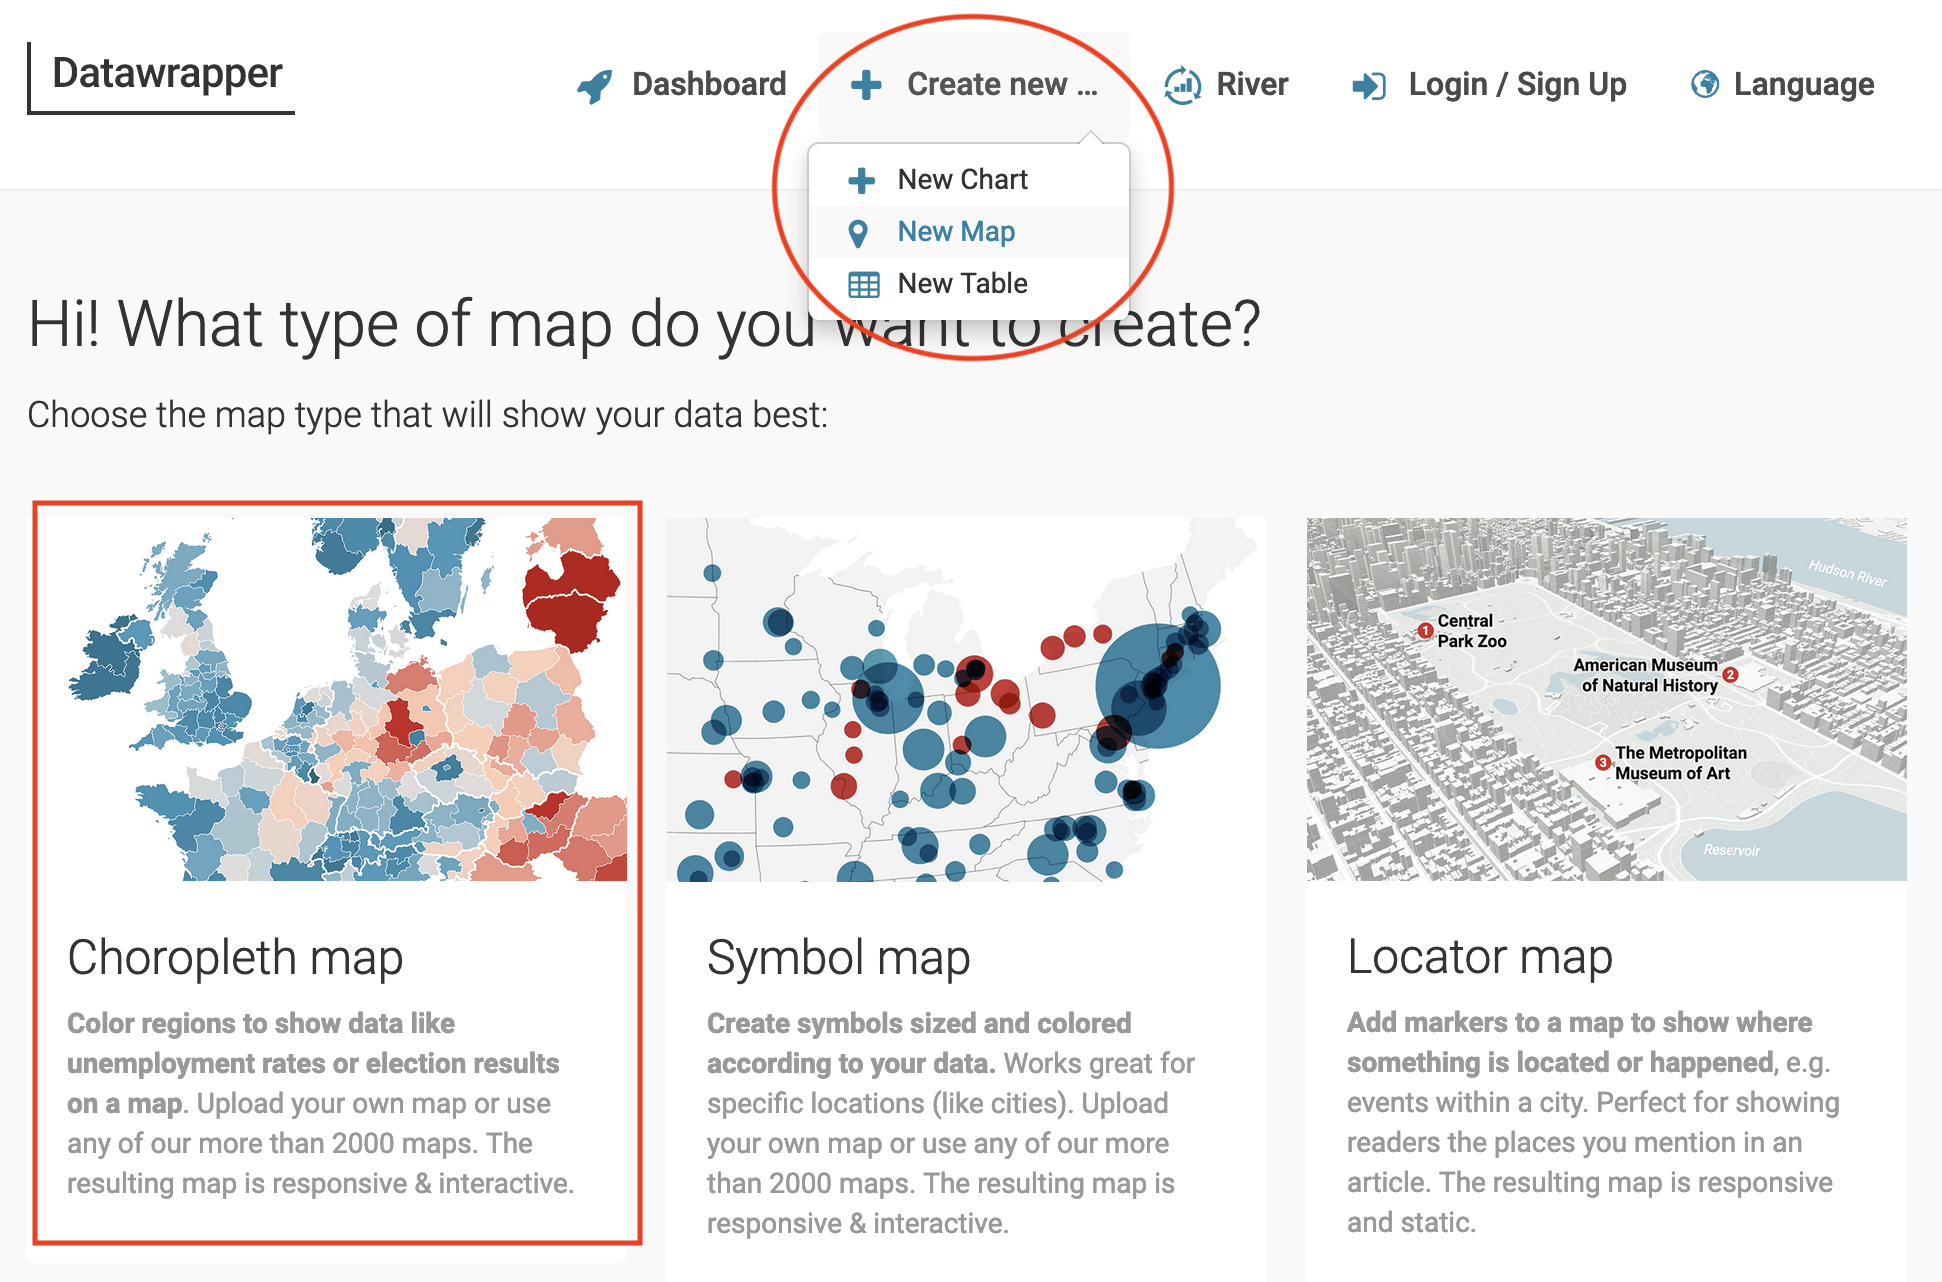 In Datawrapper, click Create new…- New Map, and choose Choropleth.